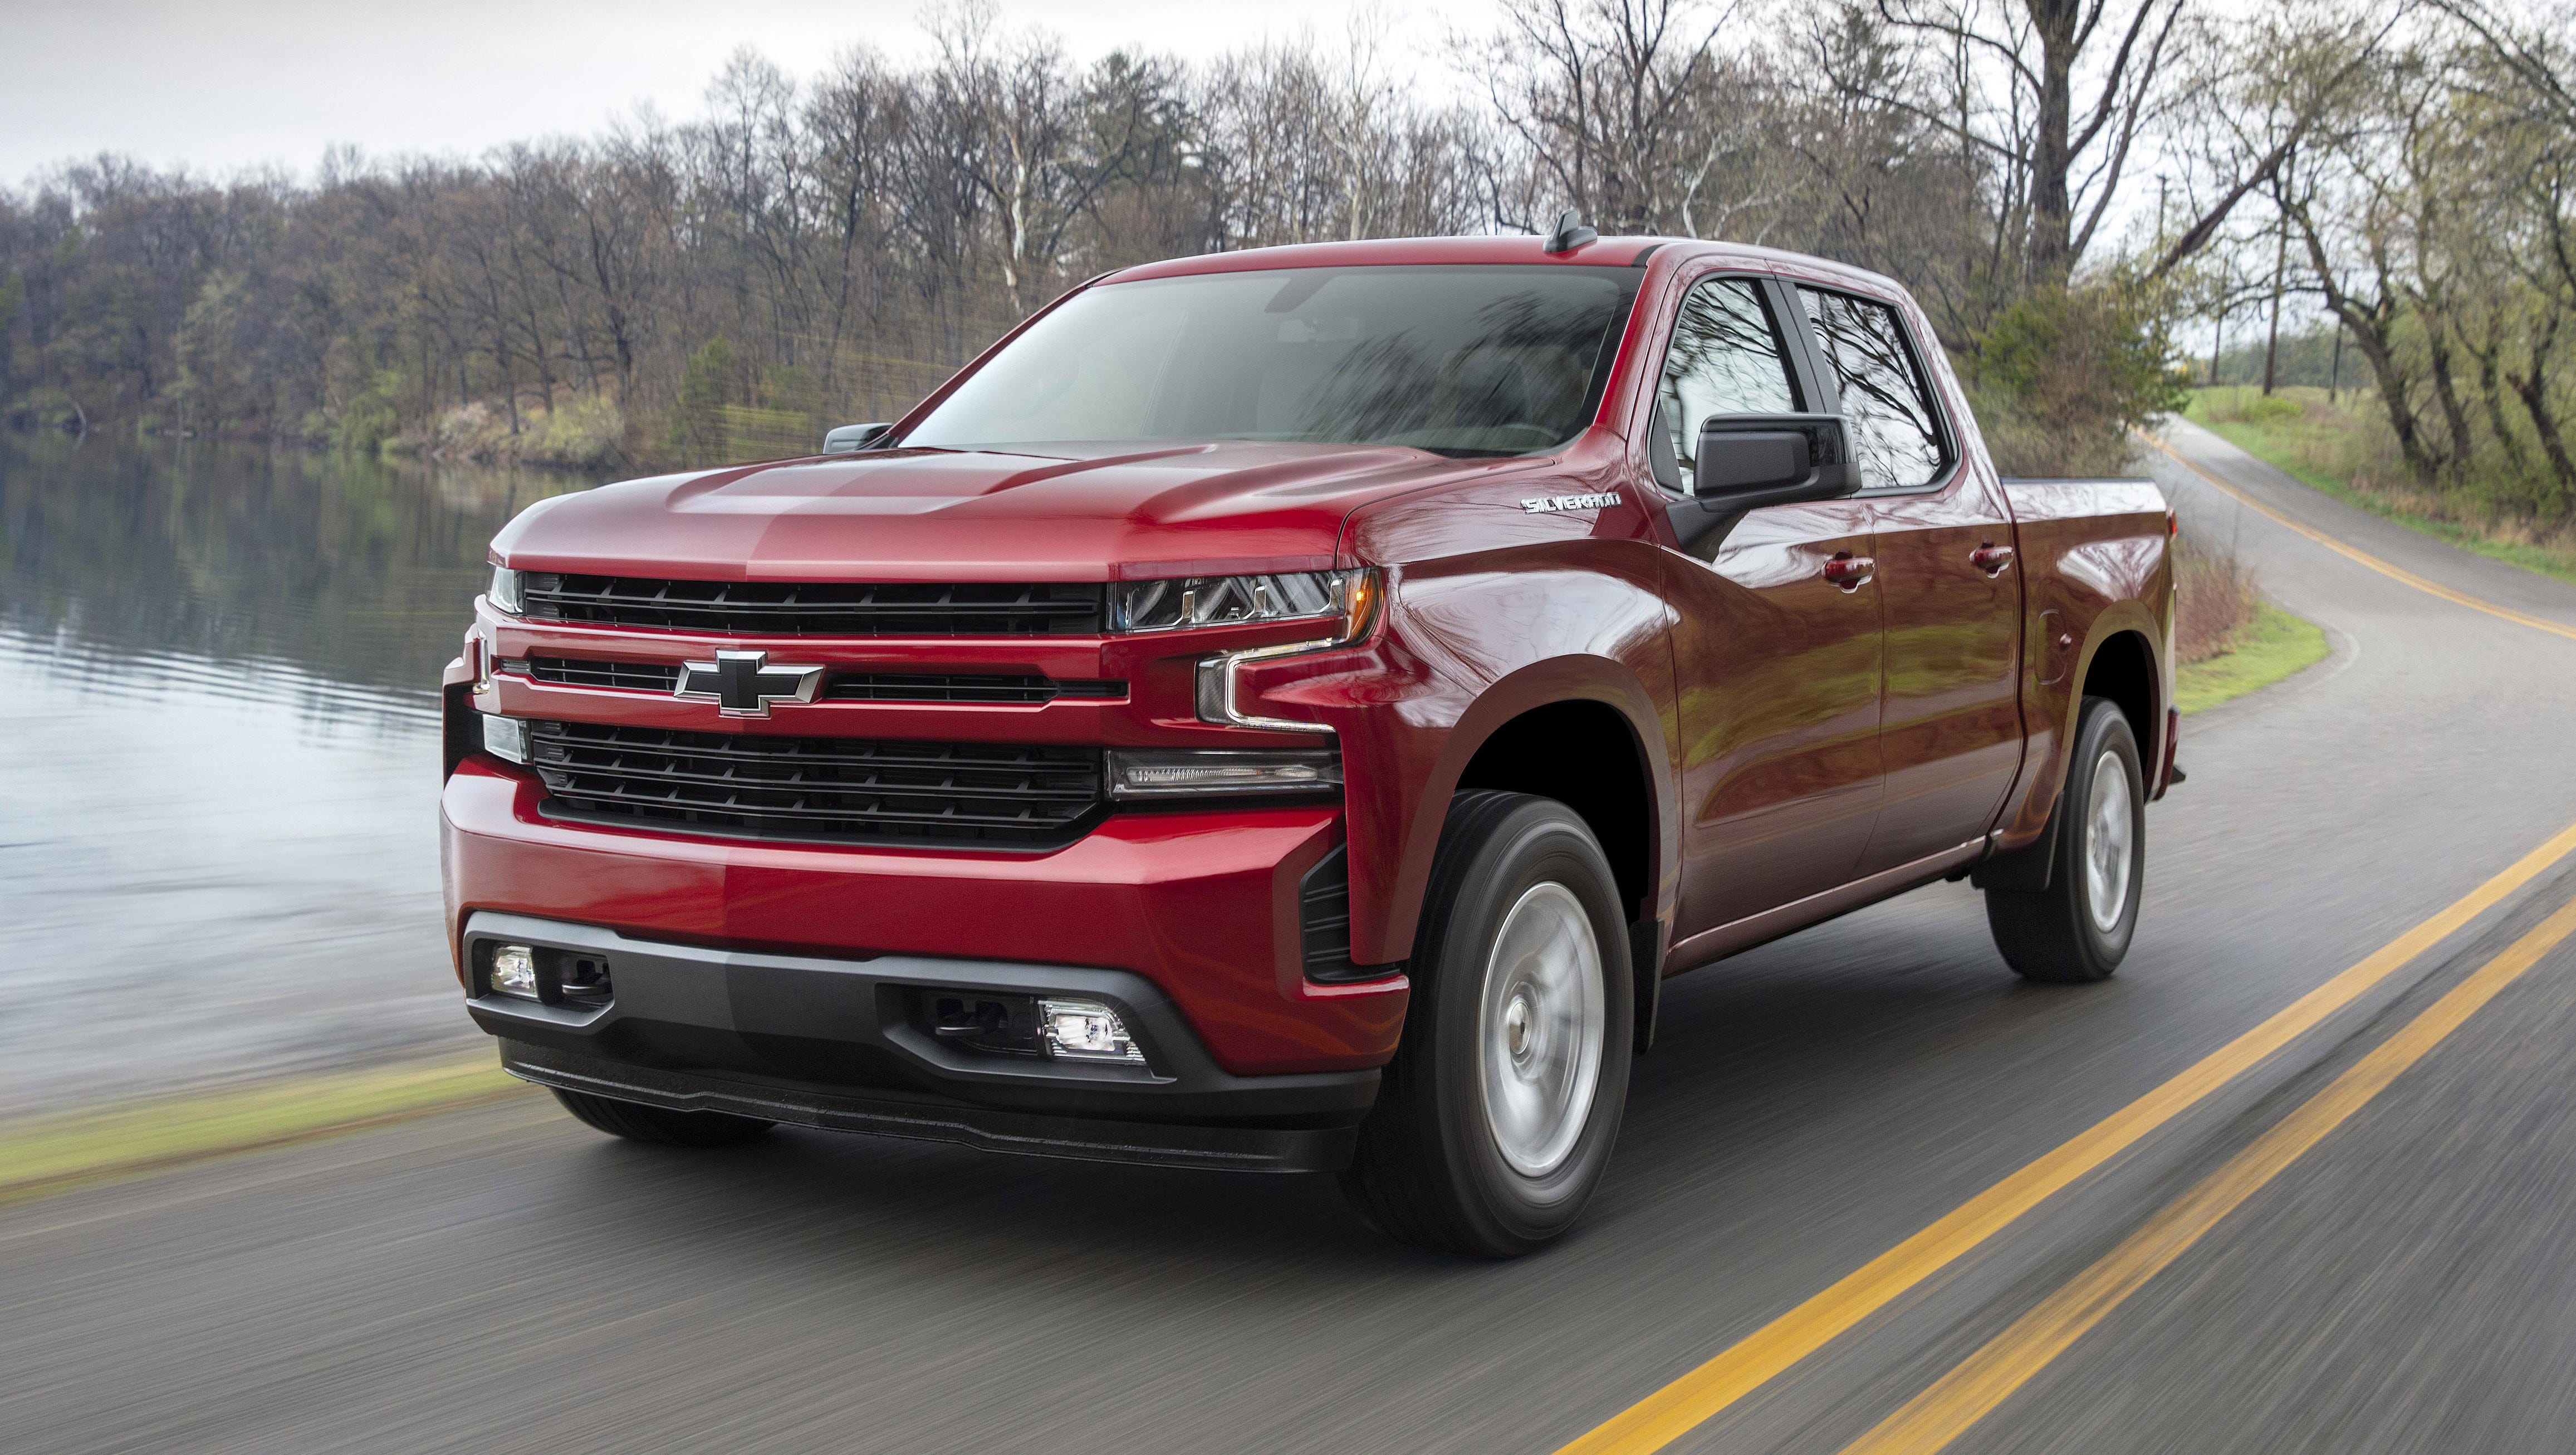 The 2019 Silverado debuted at the Detroit auto show earlier this year.